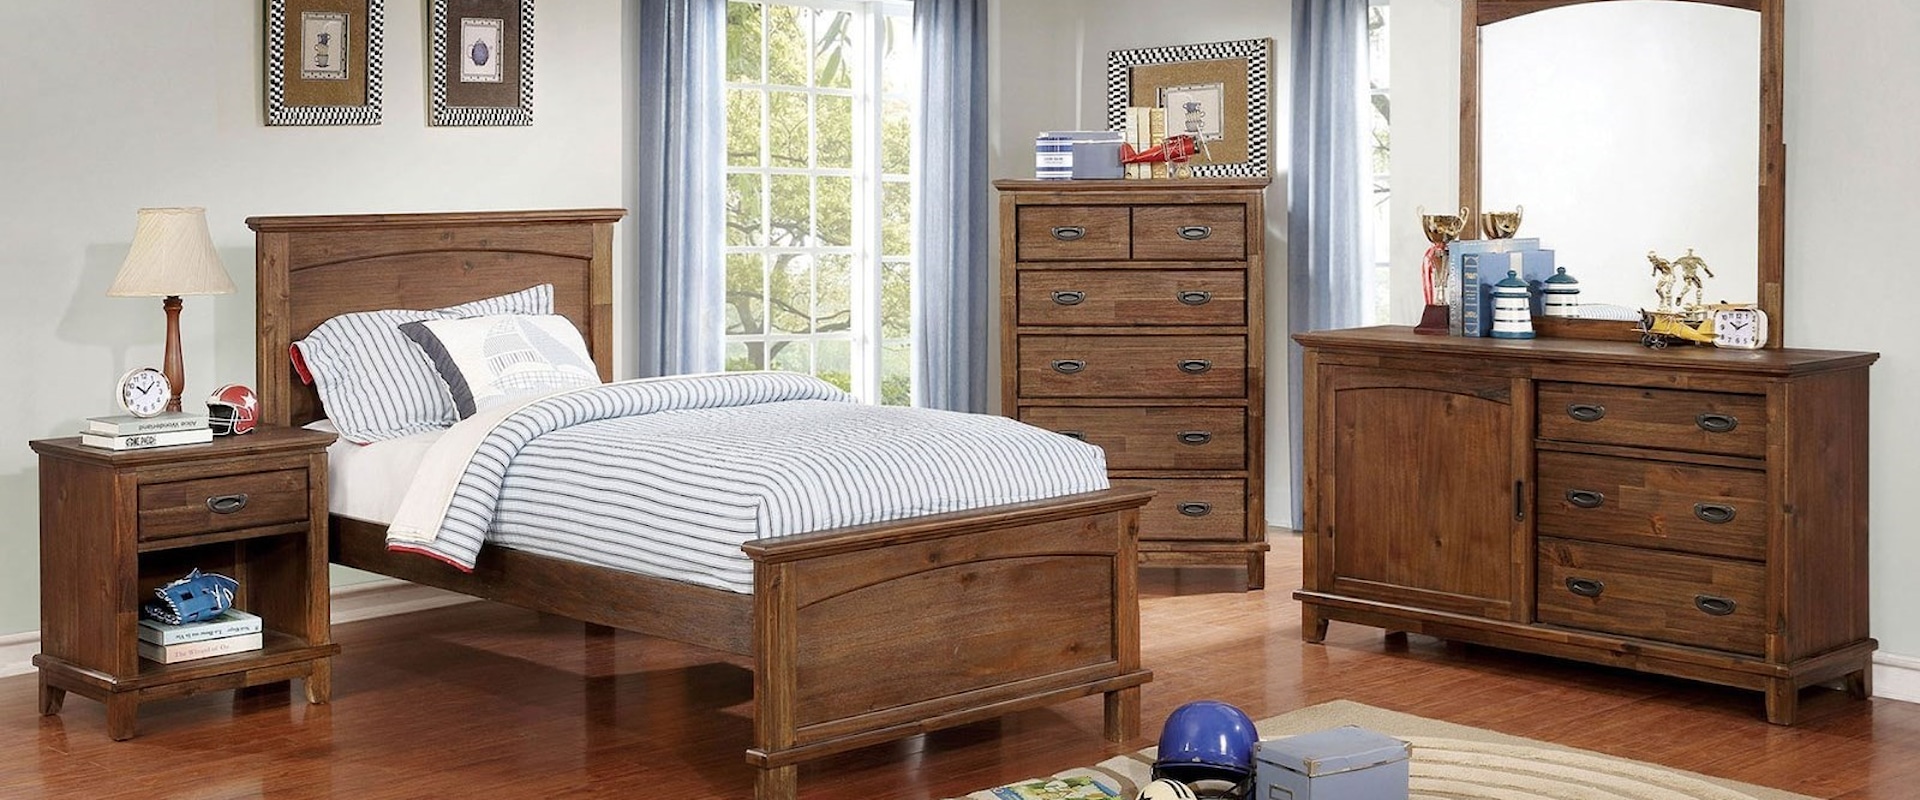 5-Piece Transitional Twin Bedroom Set